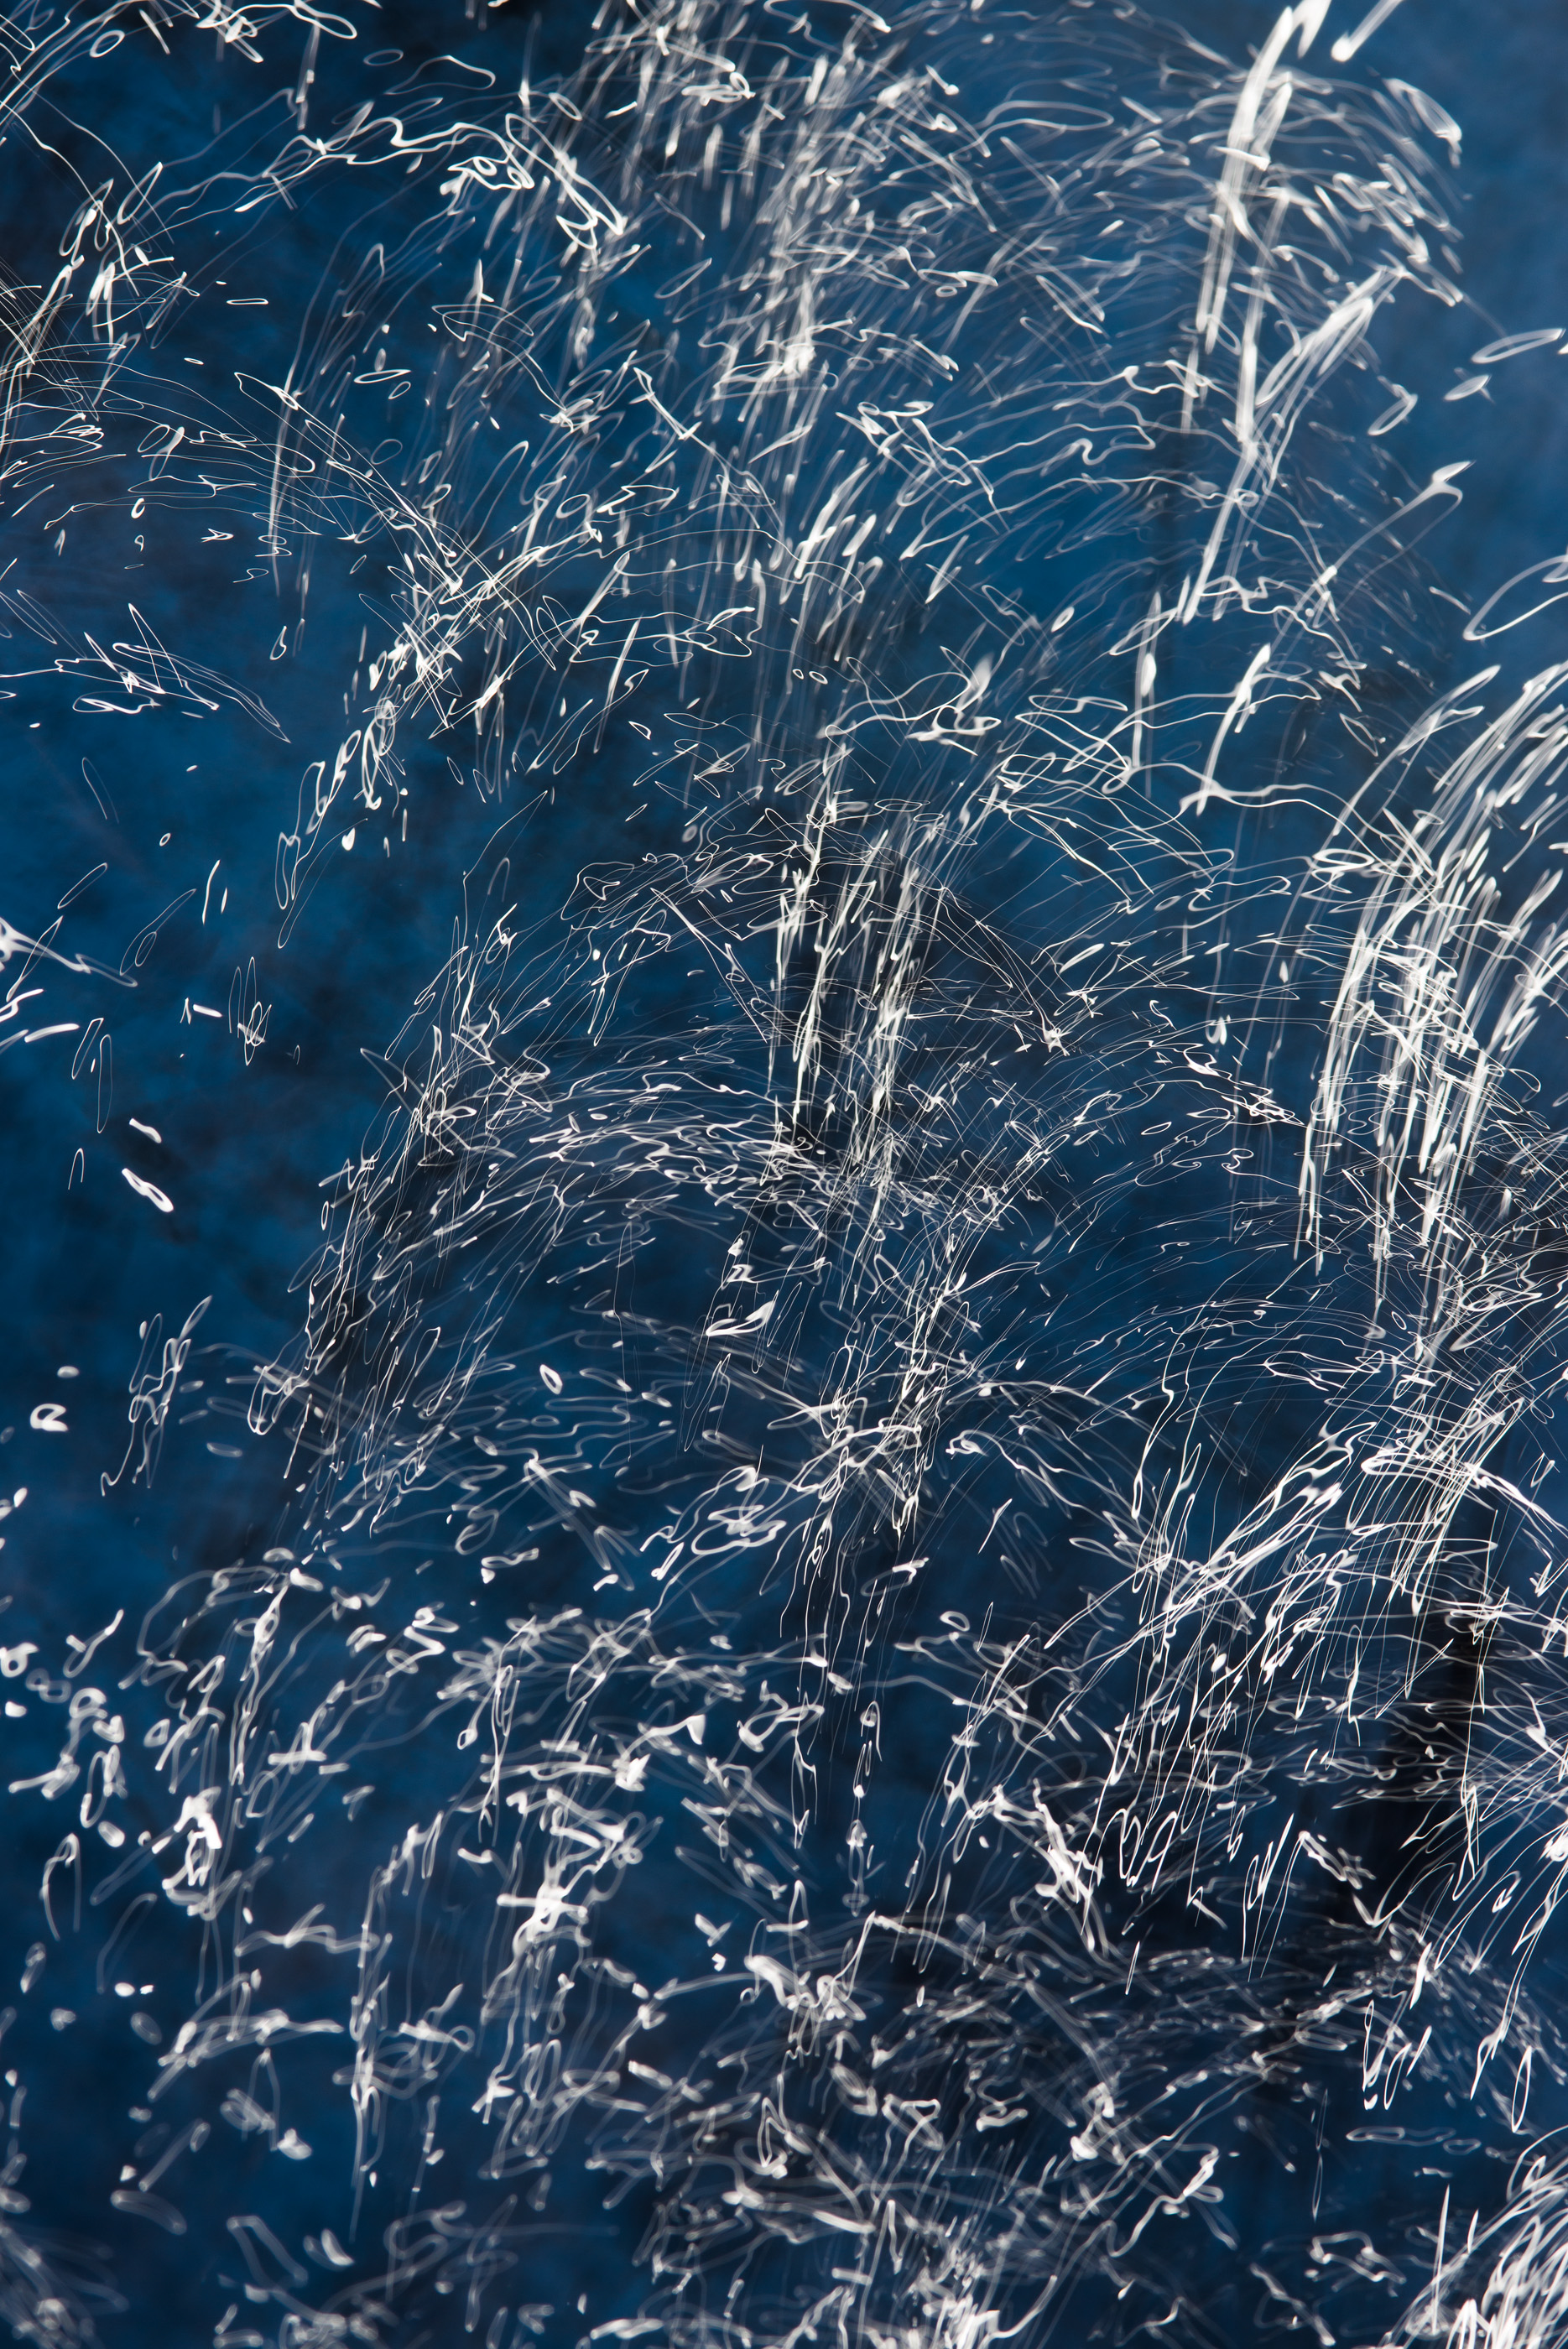   Movement in Blue and White (Sunlight), 2013  Archival Pigment Print 60 x 40 inches 